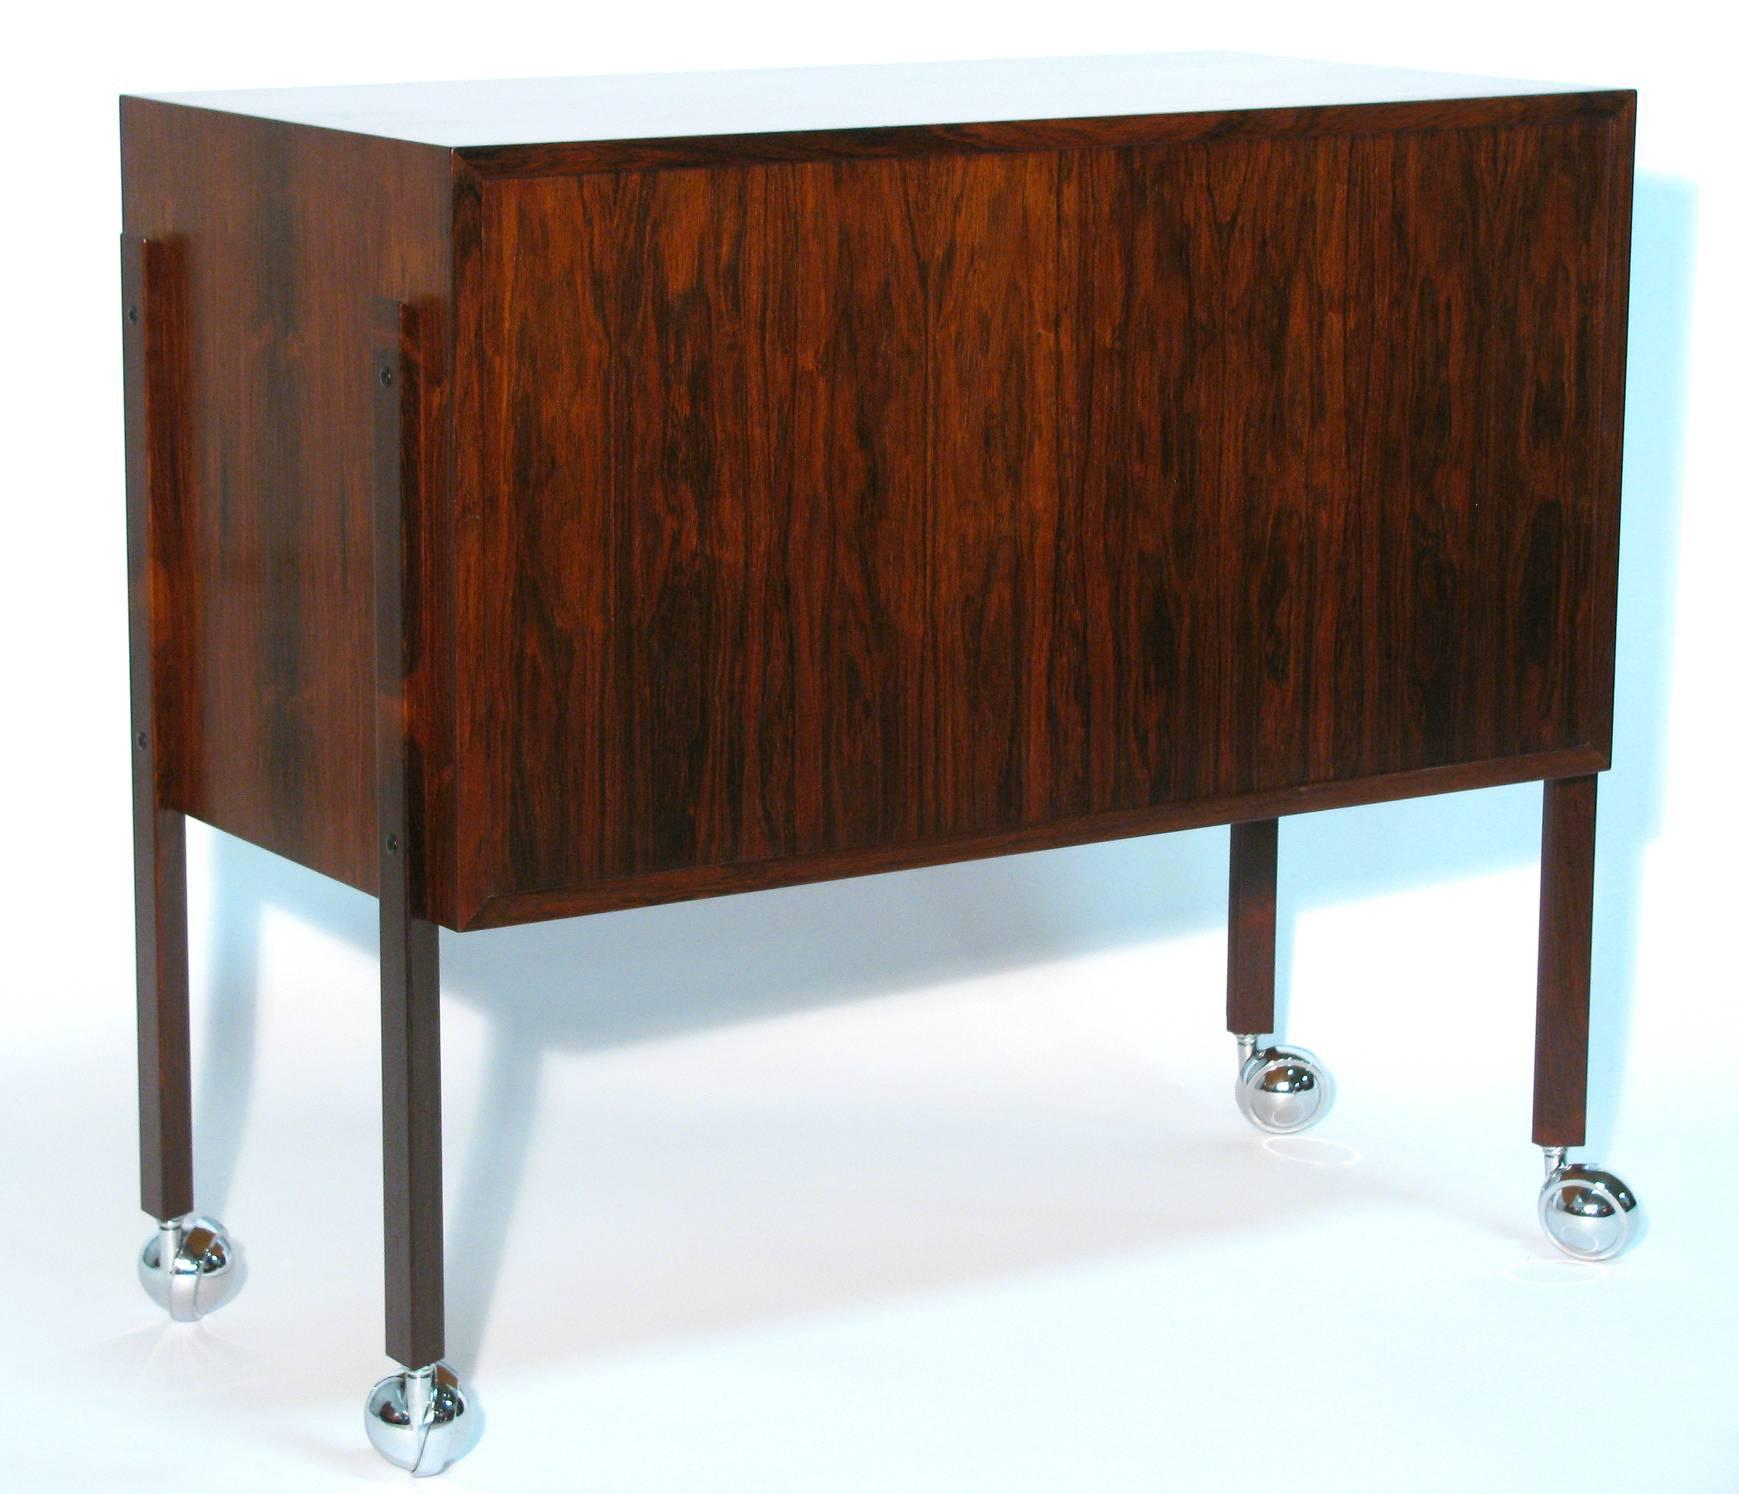 Danish Modernist Rosewood Lockable Bar Cabinet In Excellent Condition For Sale In Austin, TX